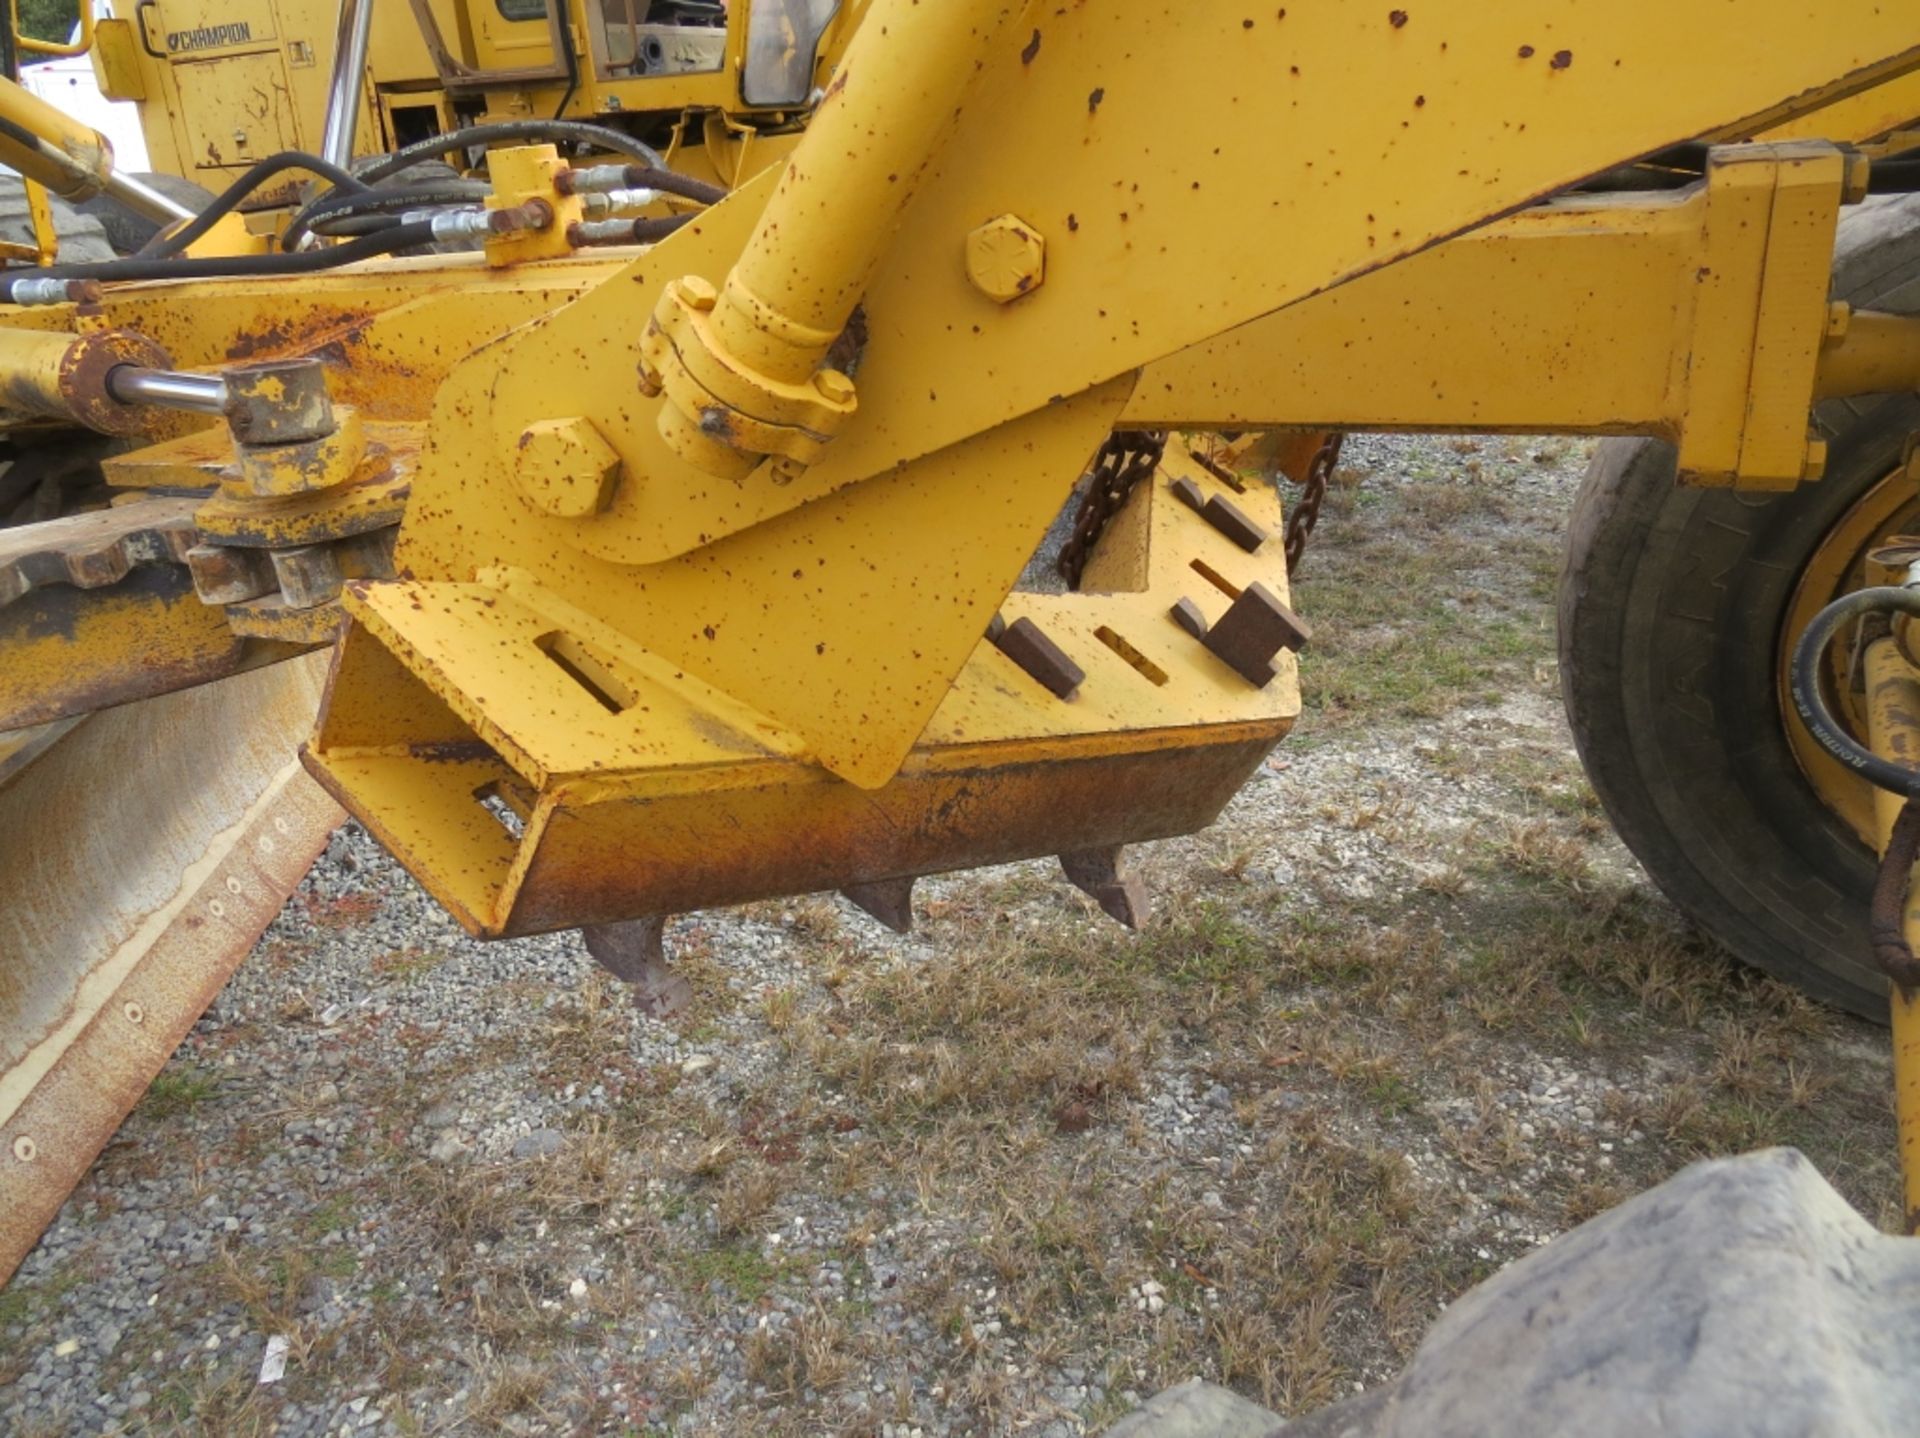 Champion 710A Series 3 Motorgrader 12' Mold Board SCARFIRE 710A-157-1136-21494 5863 hrs showing - Image 7 of 11